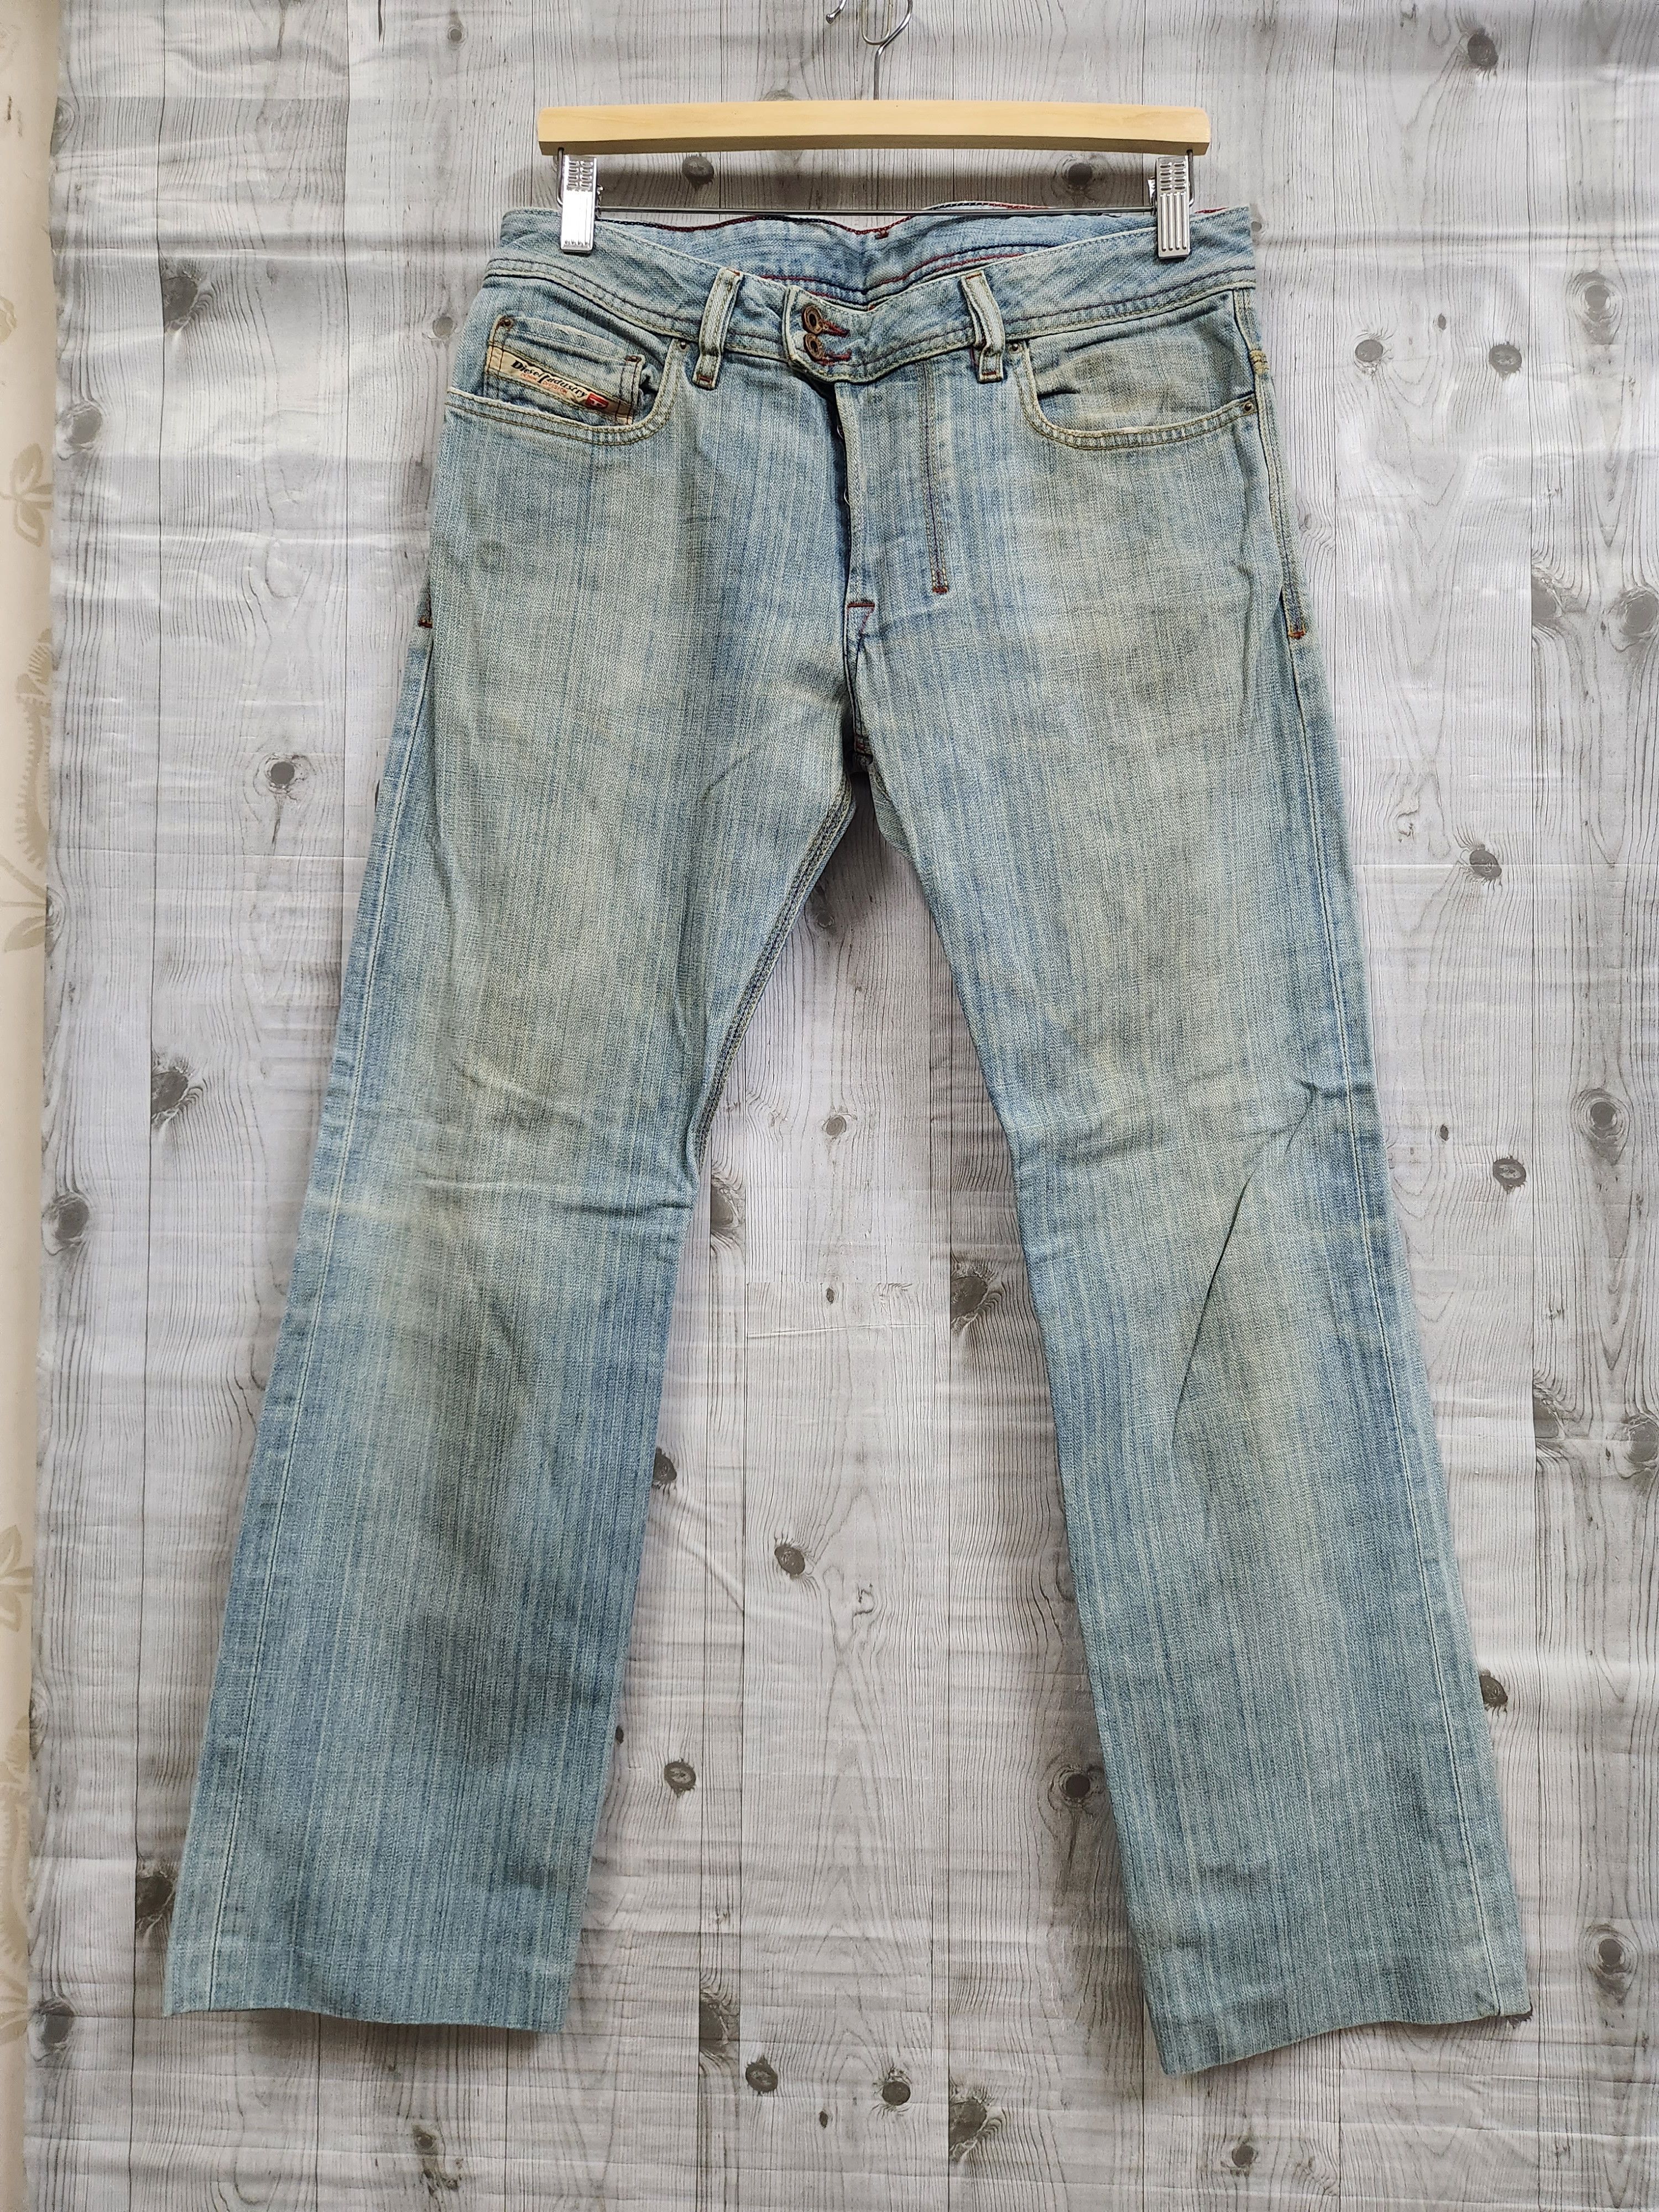 Mudwash Diesel Vintage Two Buttons Jeans Italy - 1